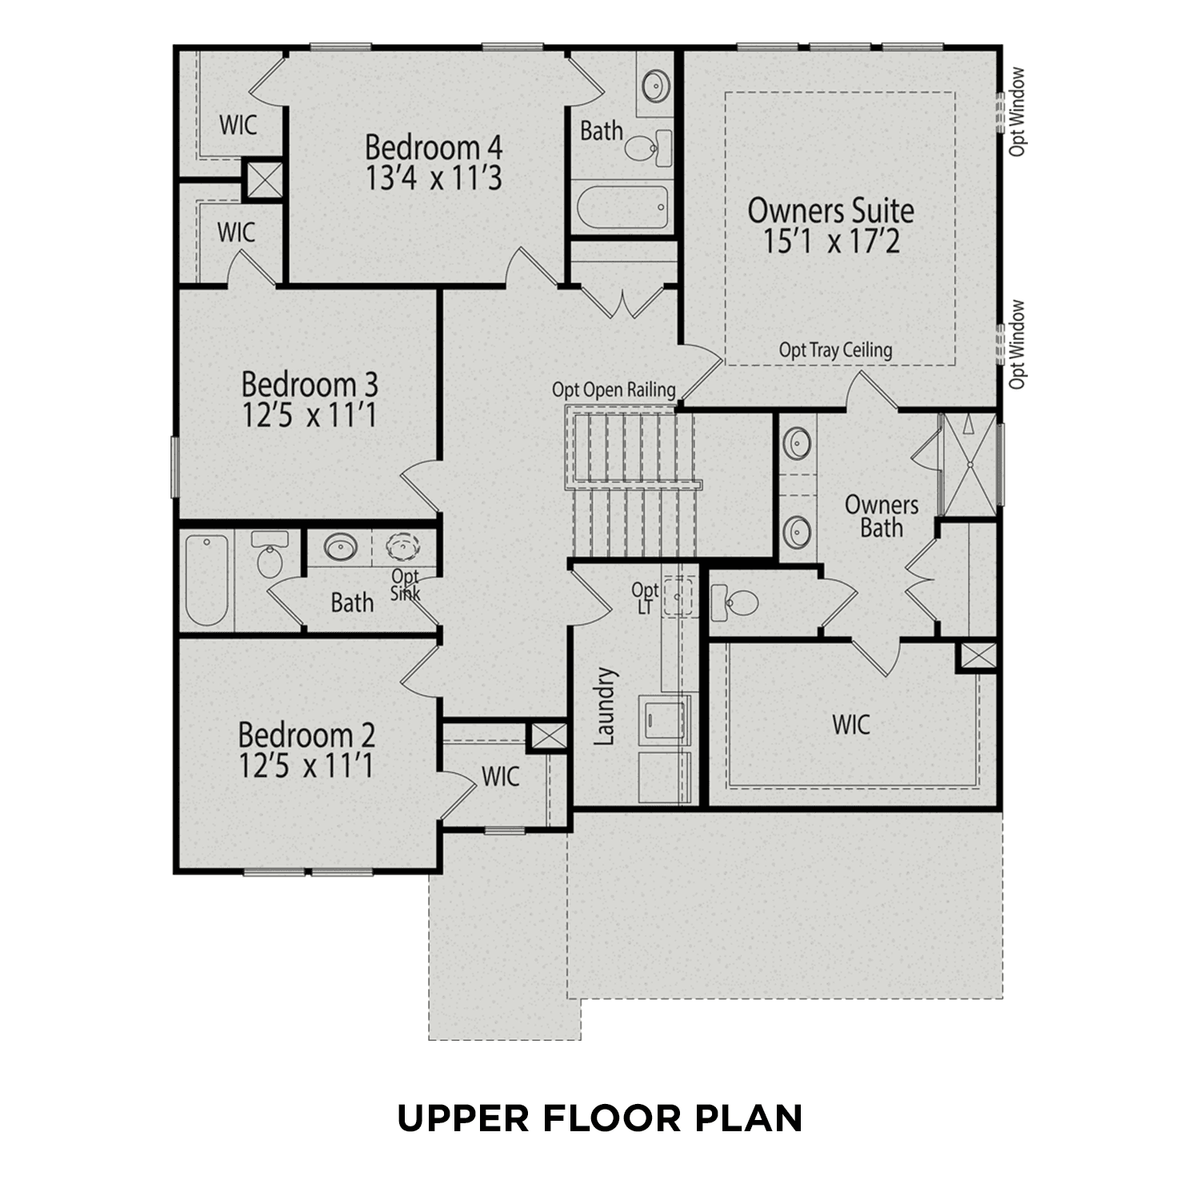 2 - The Hickory E floor plan layout for 307 Castle Pond Way in Davidson Homes' Prince Place community.